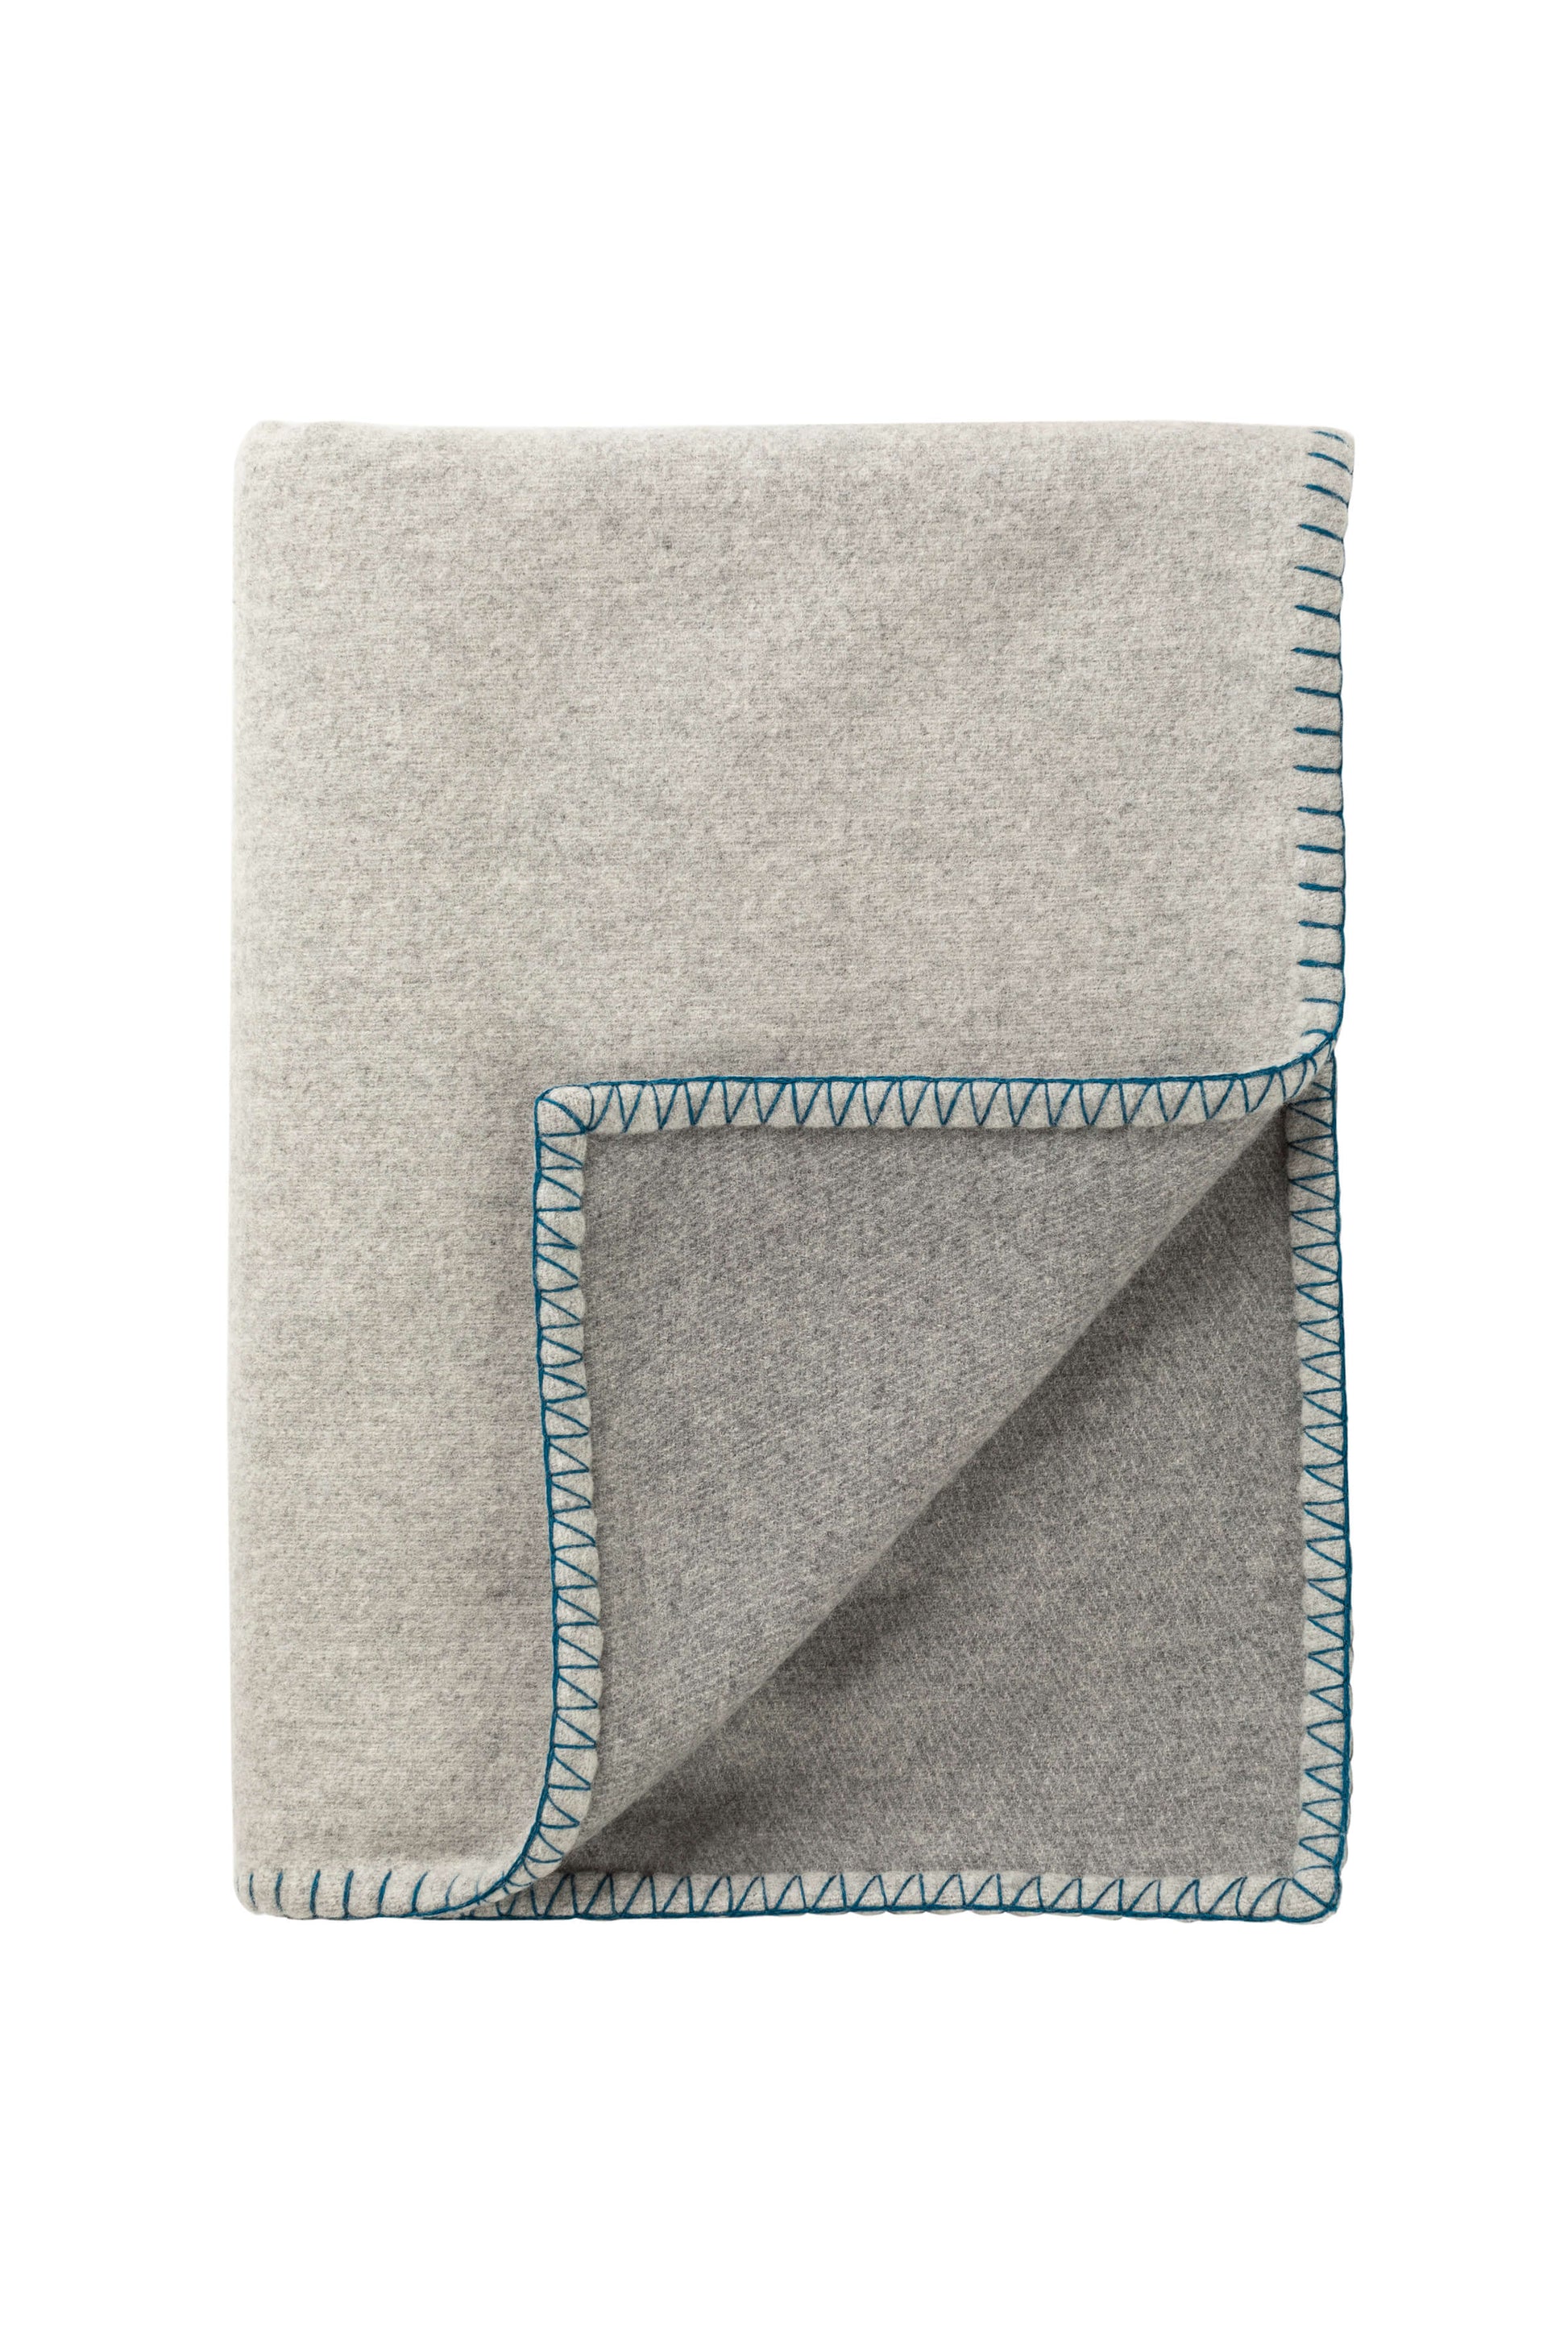 Johnstons of Elgin 2024 Blanket Collection Silver & Grey Reversible Blanket Stitched Throw TB000500RU7560ONE